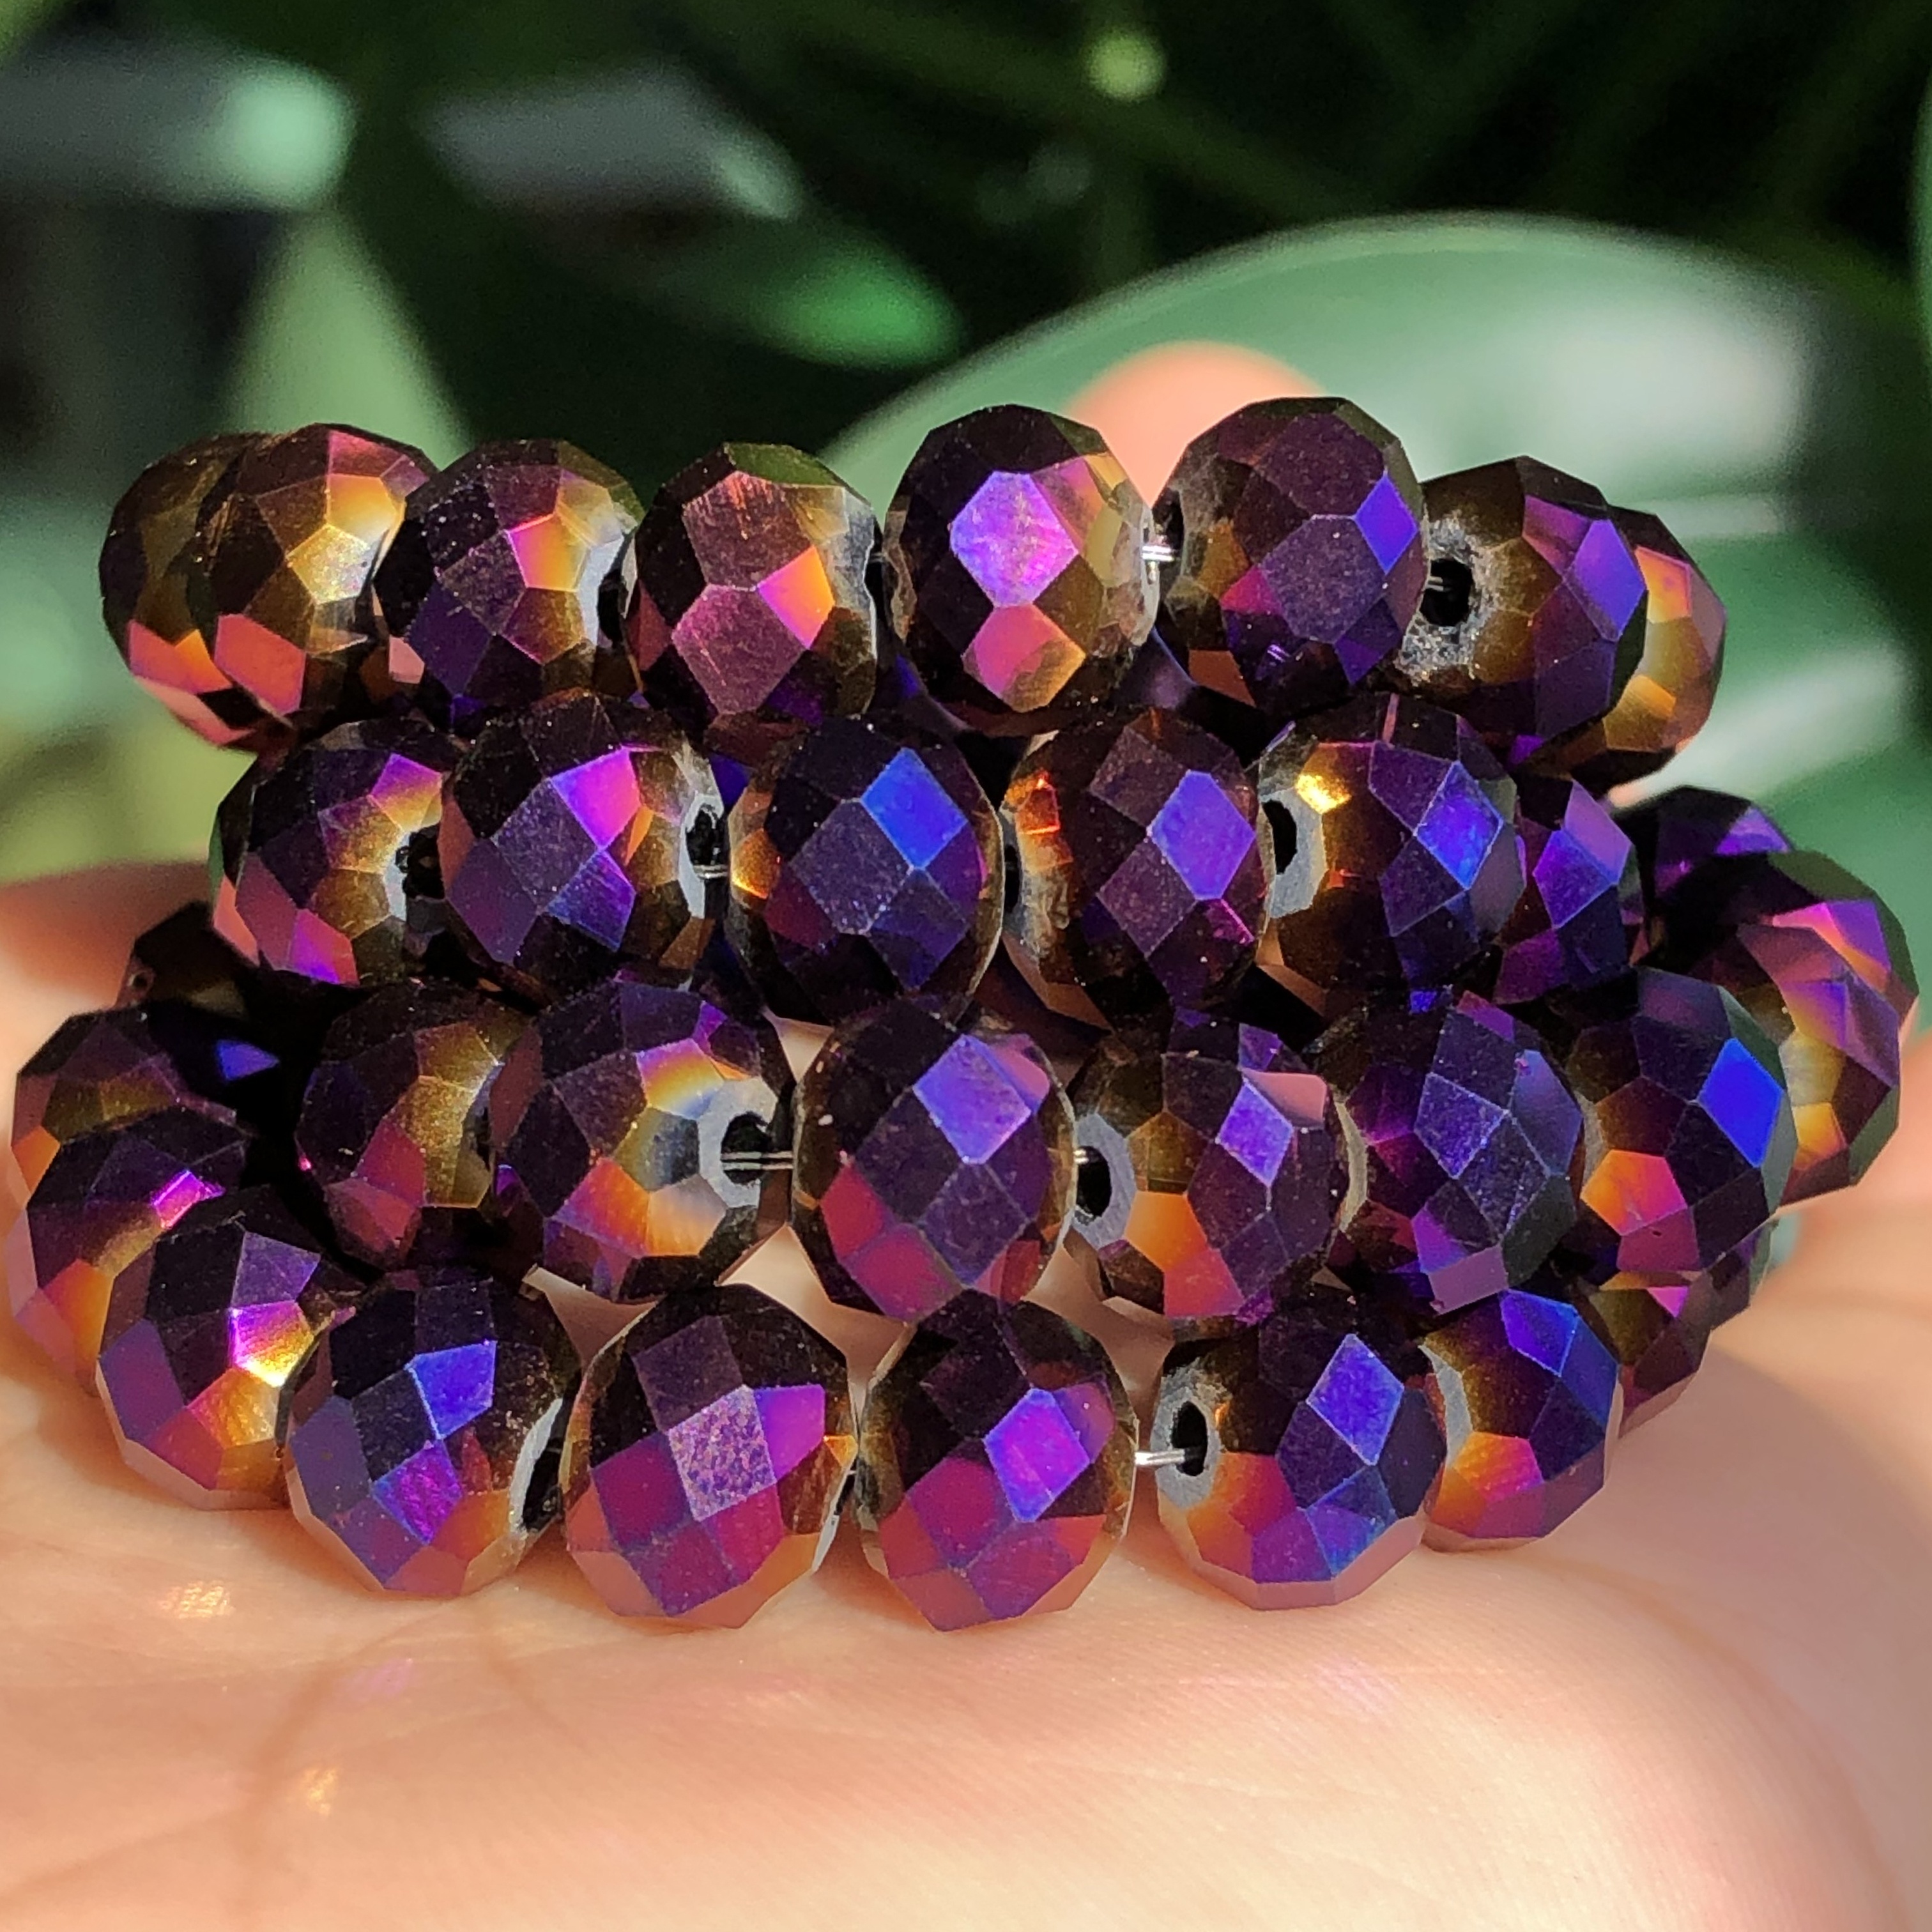 jusbeaut 265Pcs Purple Crystal Beads, Briollete Faceted Crystal Glass Beads  for Jewelry Making, 8mm DIY Bulk Glass Beads for Crafts, Faceted Crystal